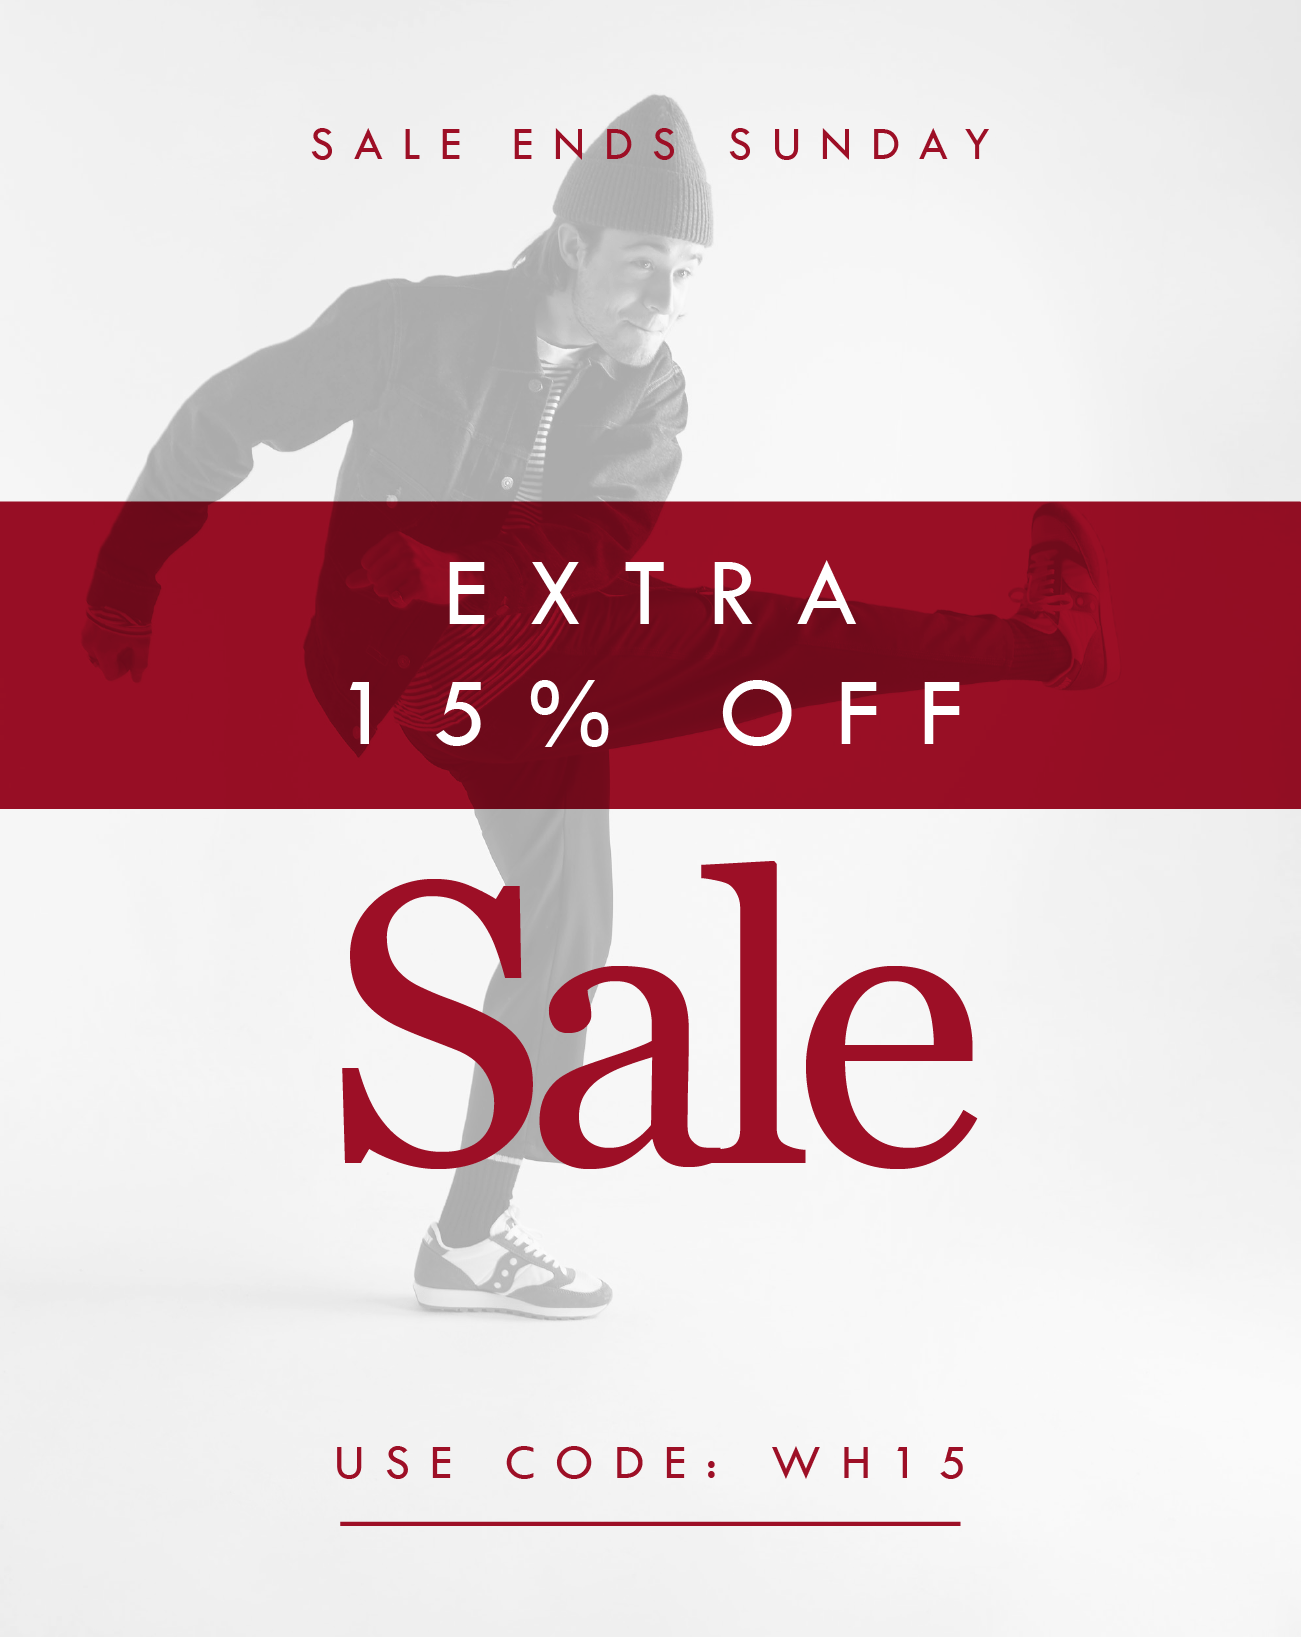 SALE ENDS SUNDAY

EXTRA
15% OFF

Sale

USE CODE: WH15